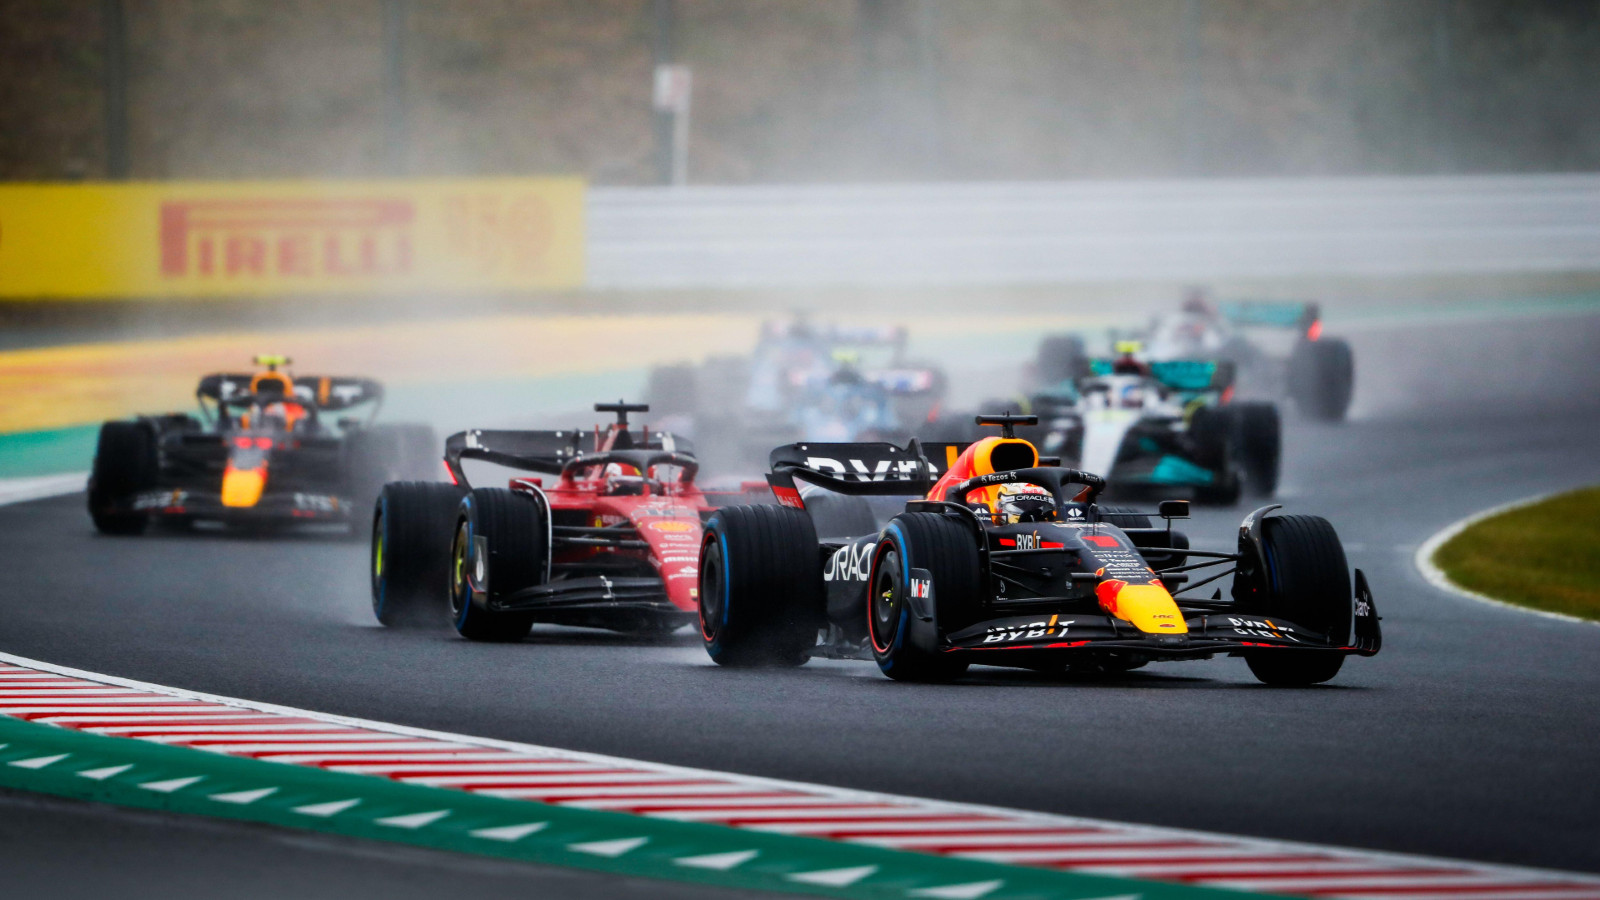 Red Bull's Max Verstappen leads Ferrari's Charles Leclerc at the Japanese Grand Prix.  Suzuka, October 2022. points